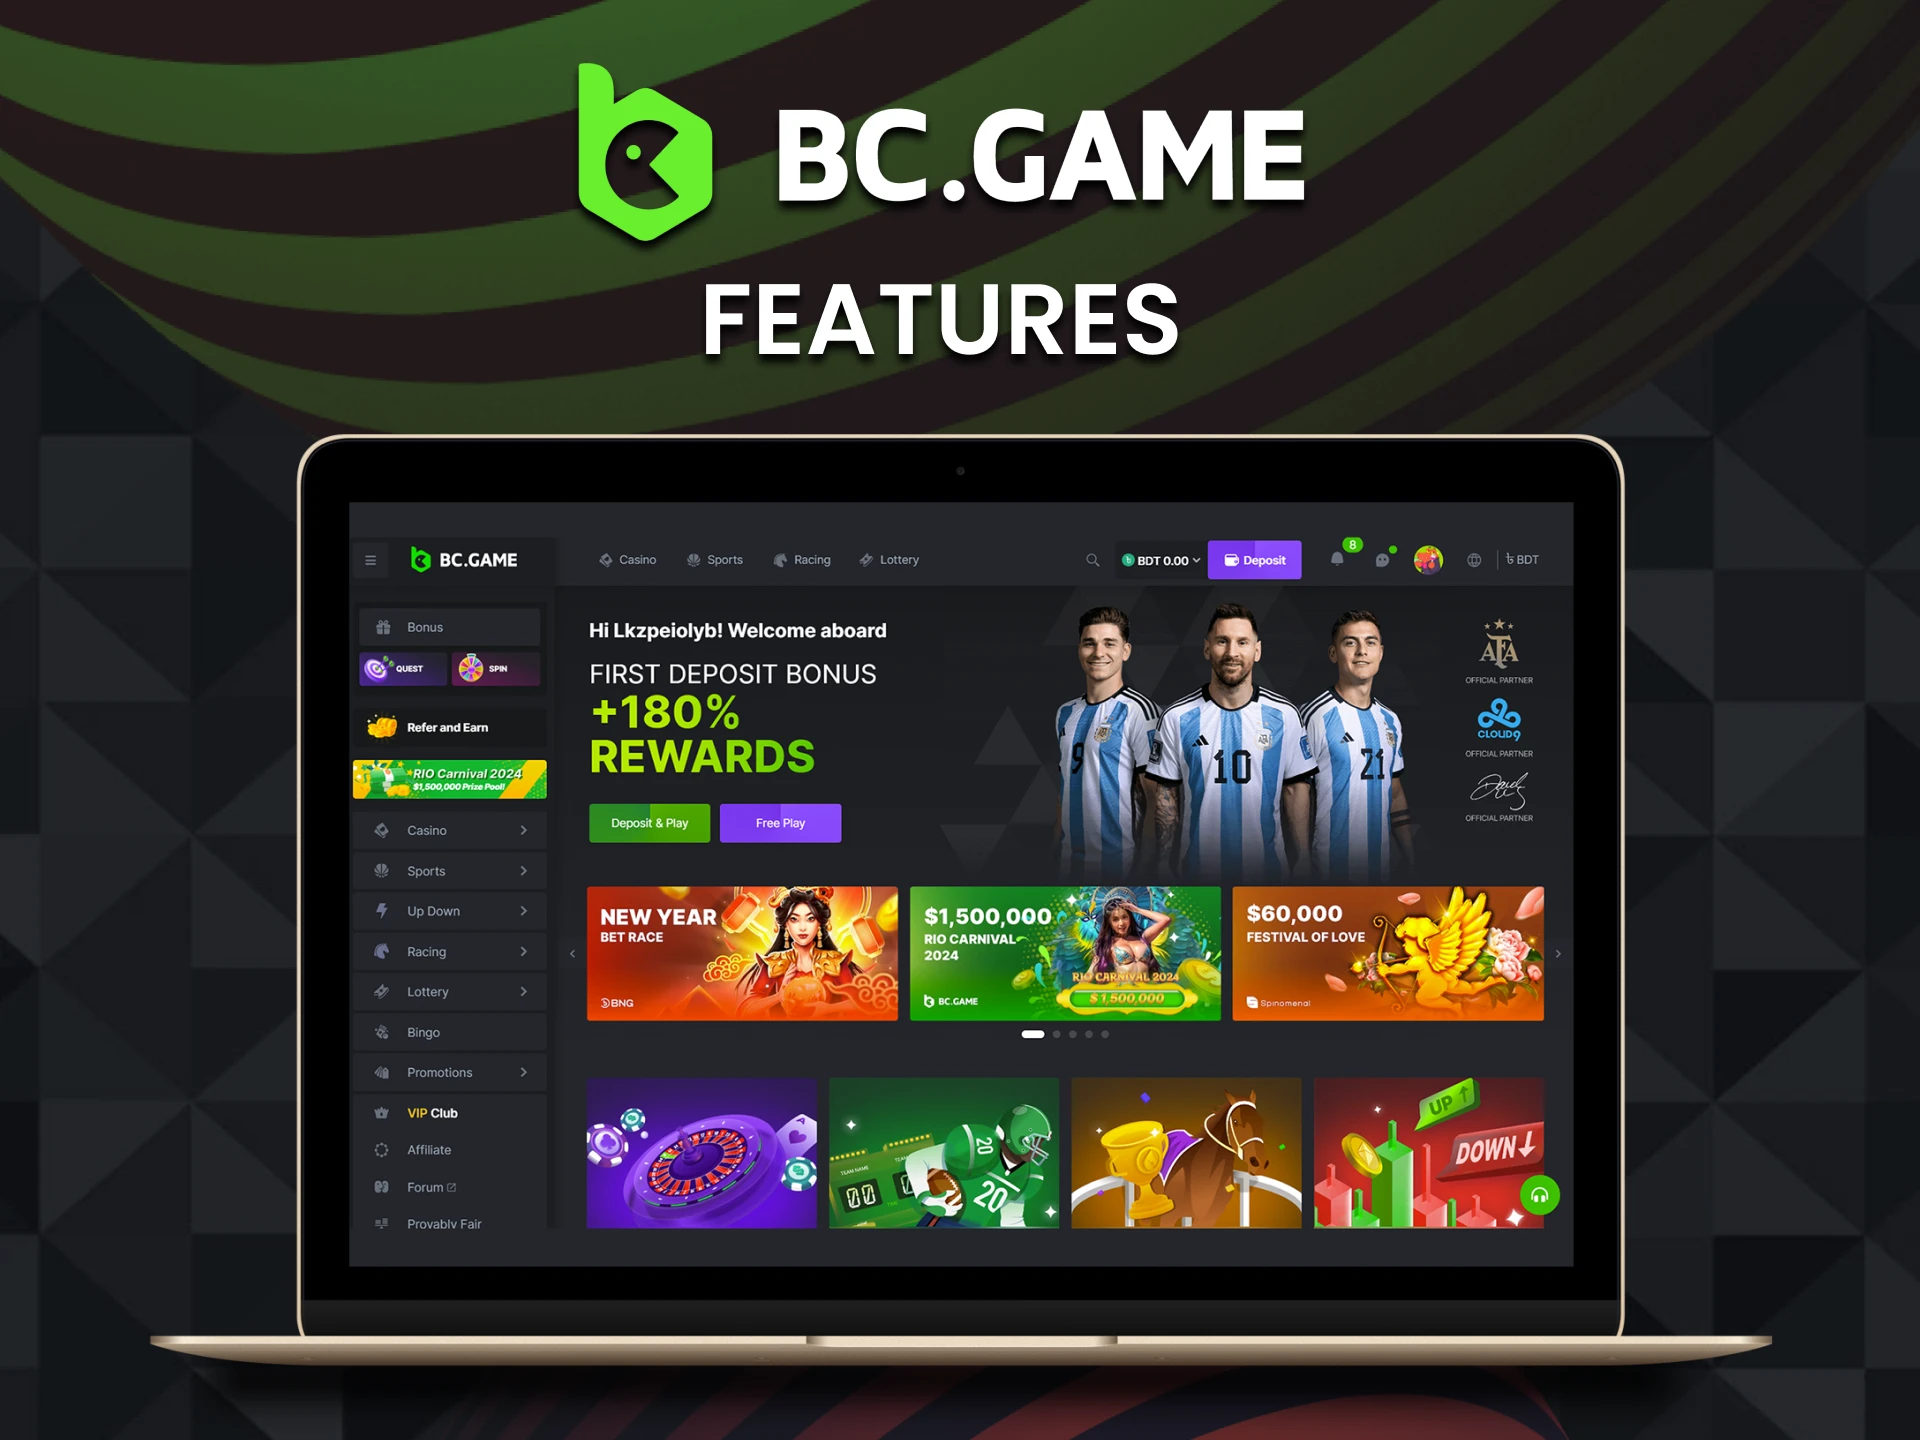 We will tell you about the capabilities of the BC Game website.